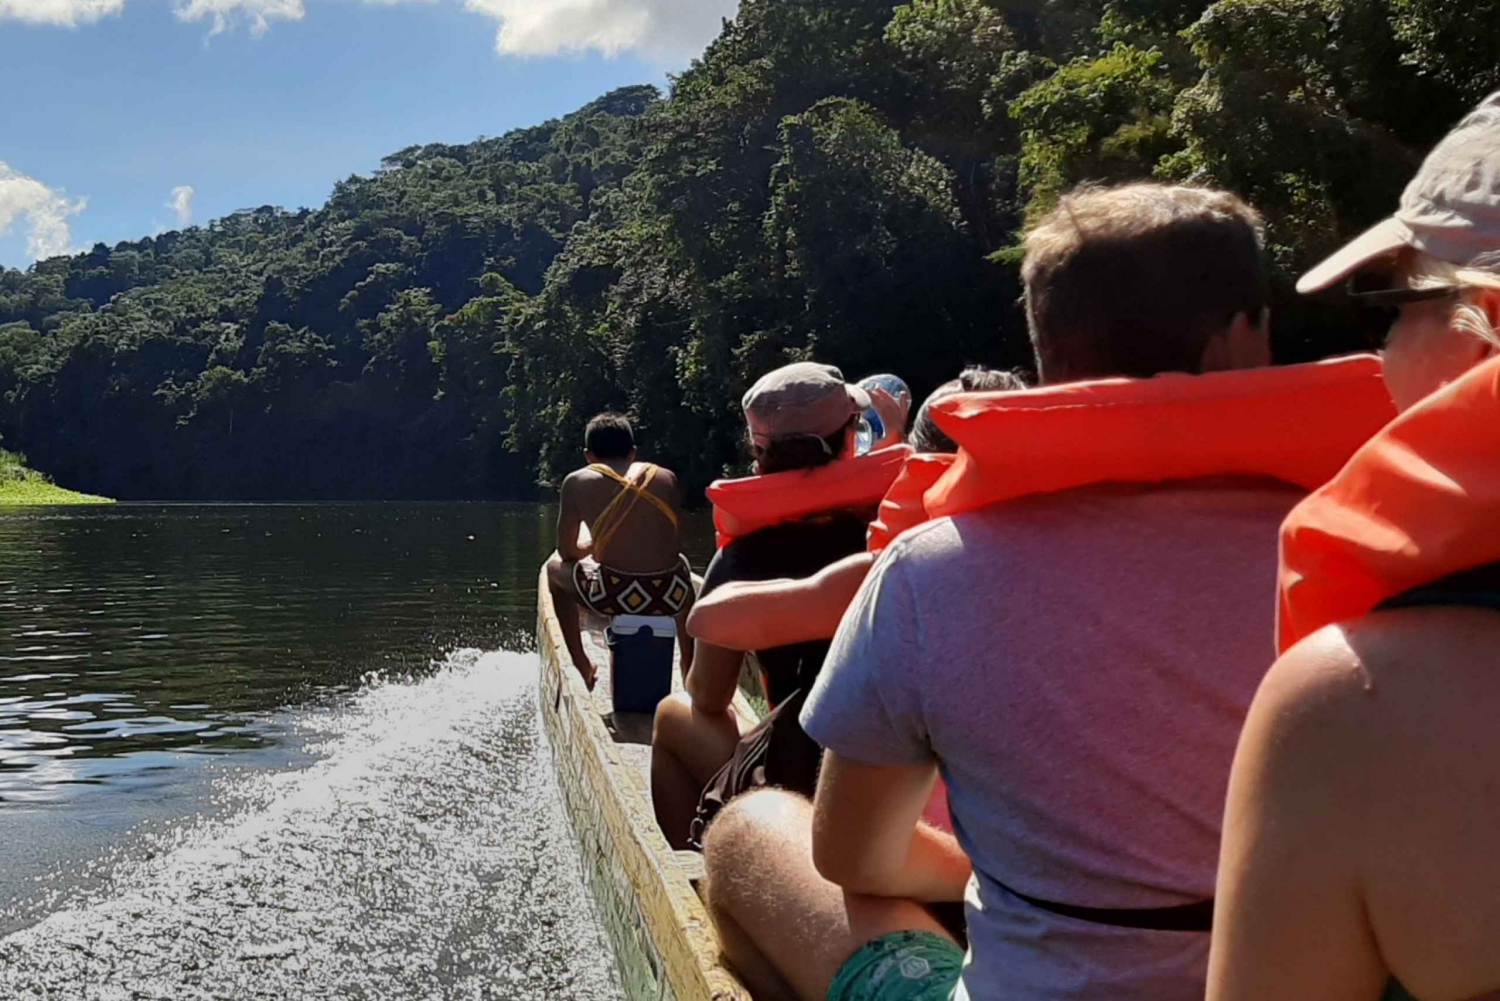 From Panama City: Chagres Rainforest and Embera Village Tour